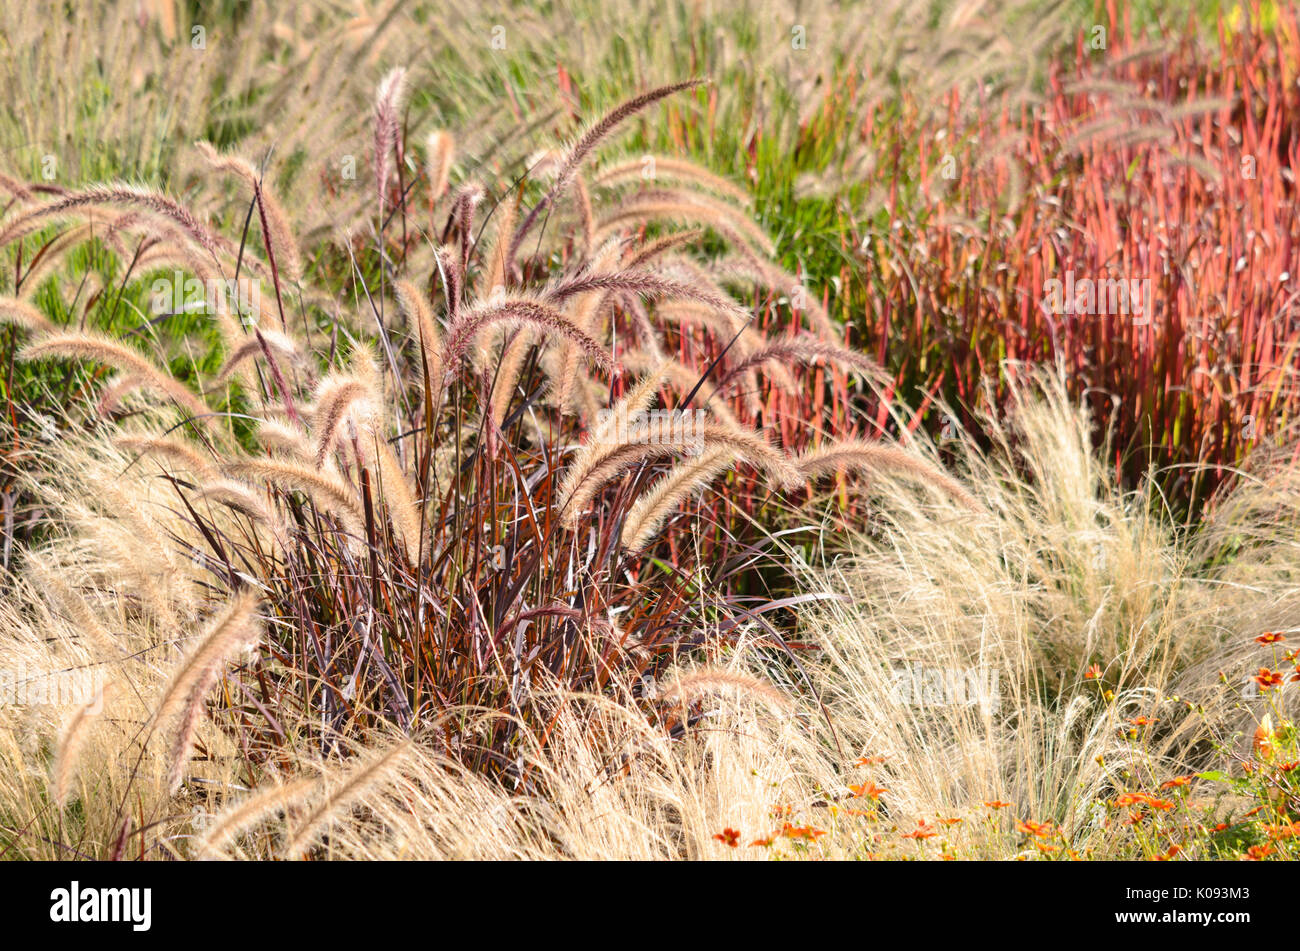 Fountain grass (Pennisetum setaceum 'Rubrum') and Mexican feather grass (Nassella tenuissima syn. Stipa tenuissima) Stock Photo